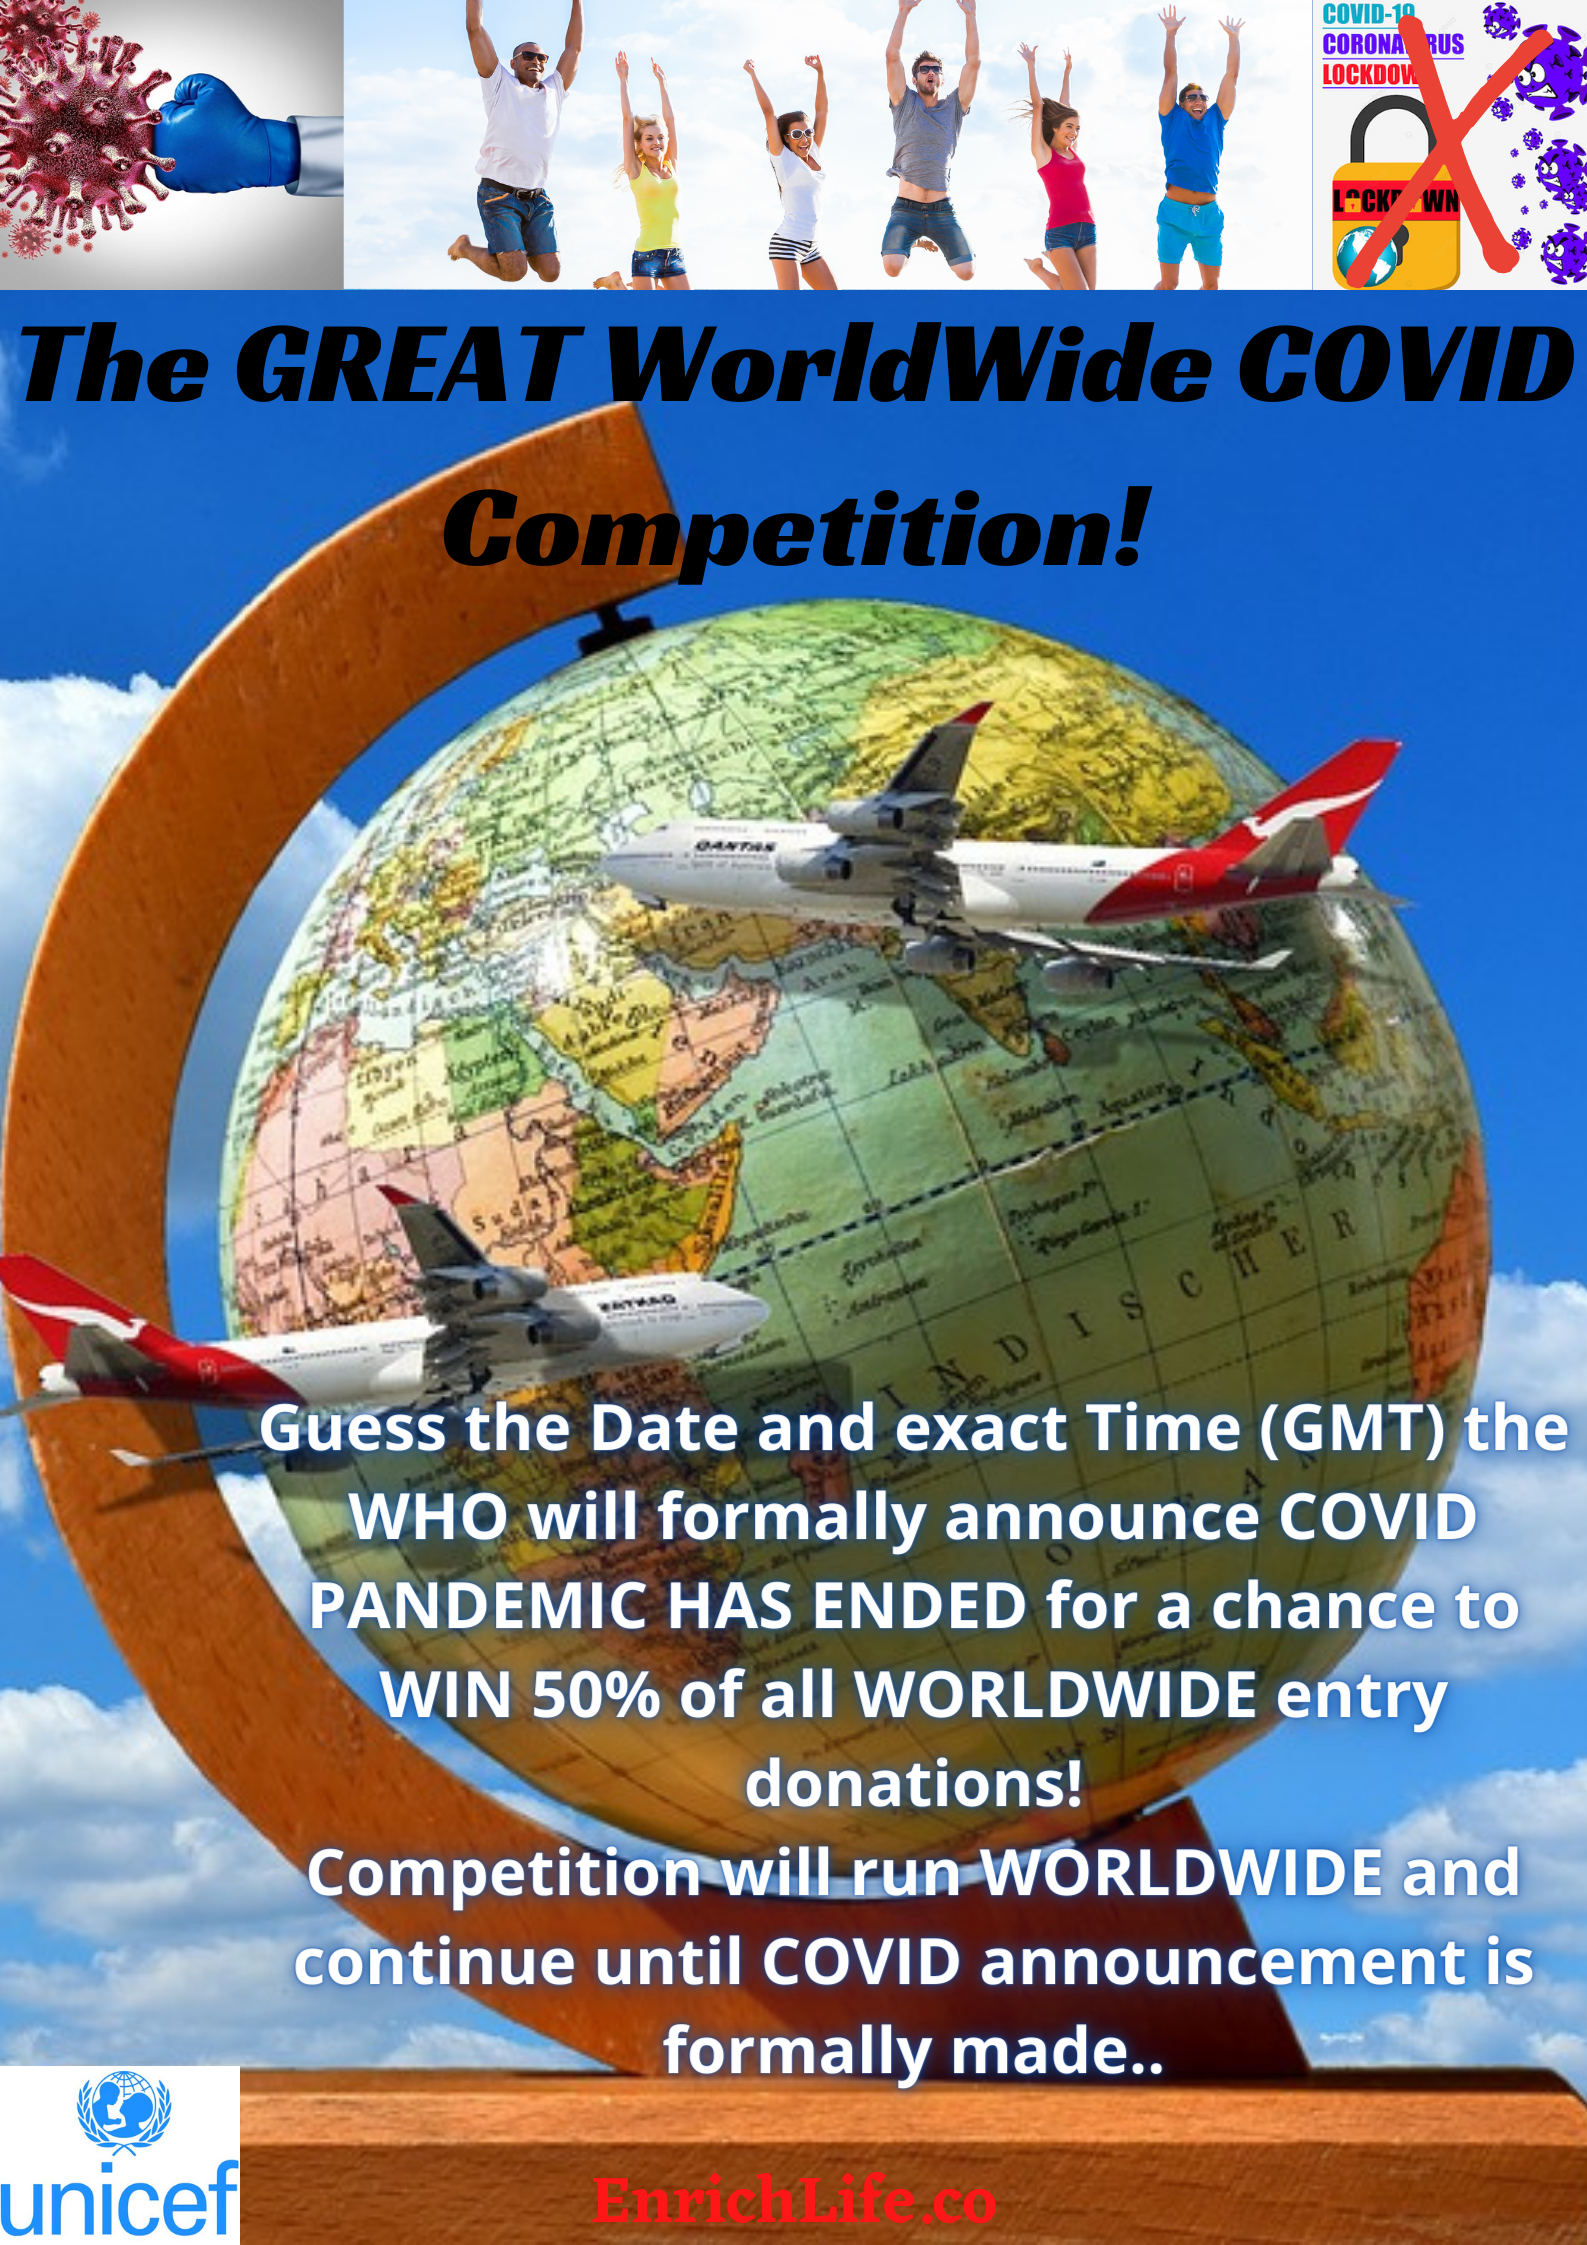 The GREAT WorldWide COVID-19 Competition!